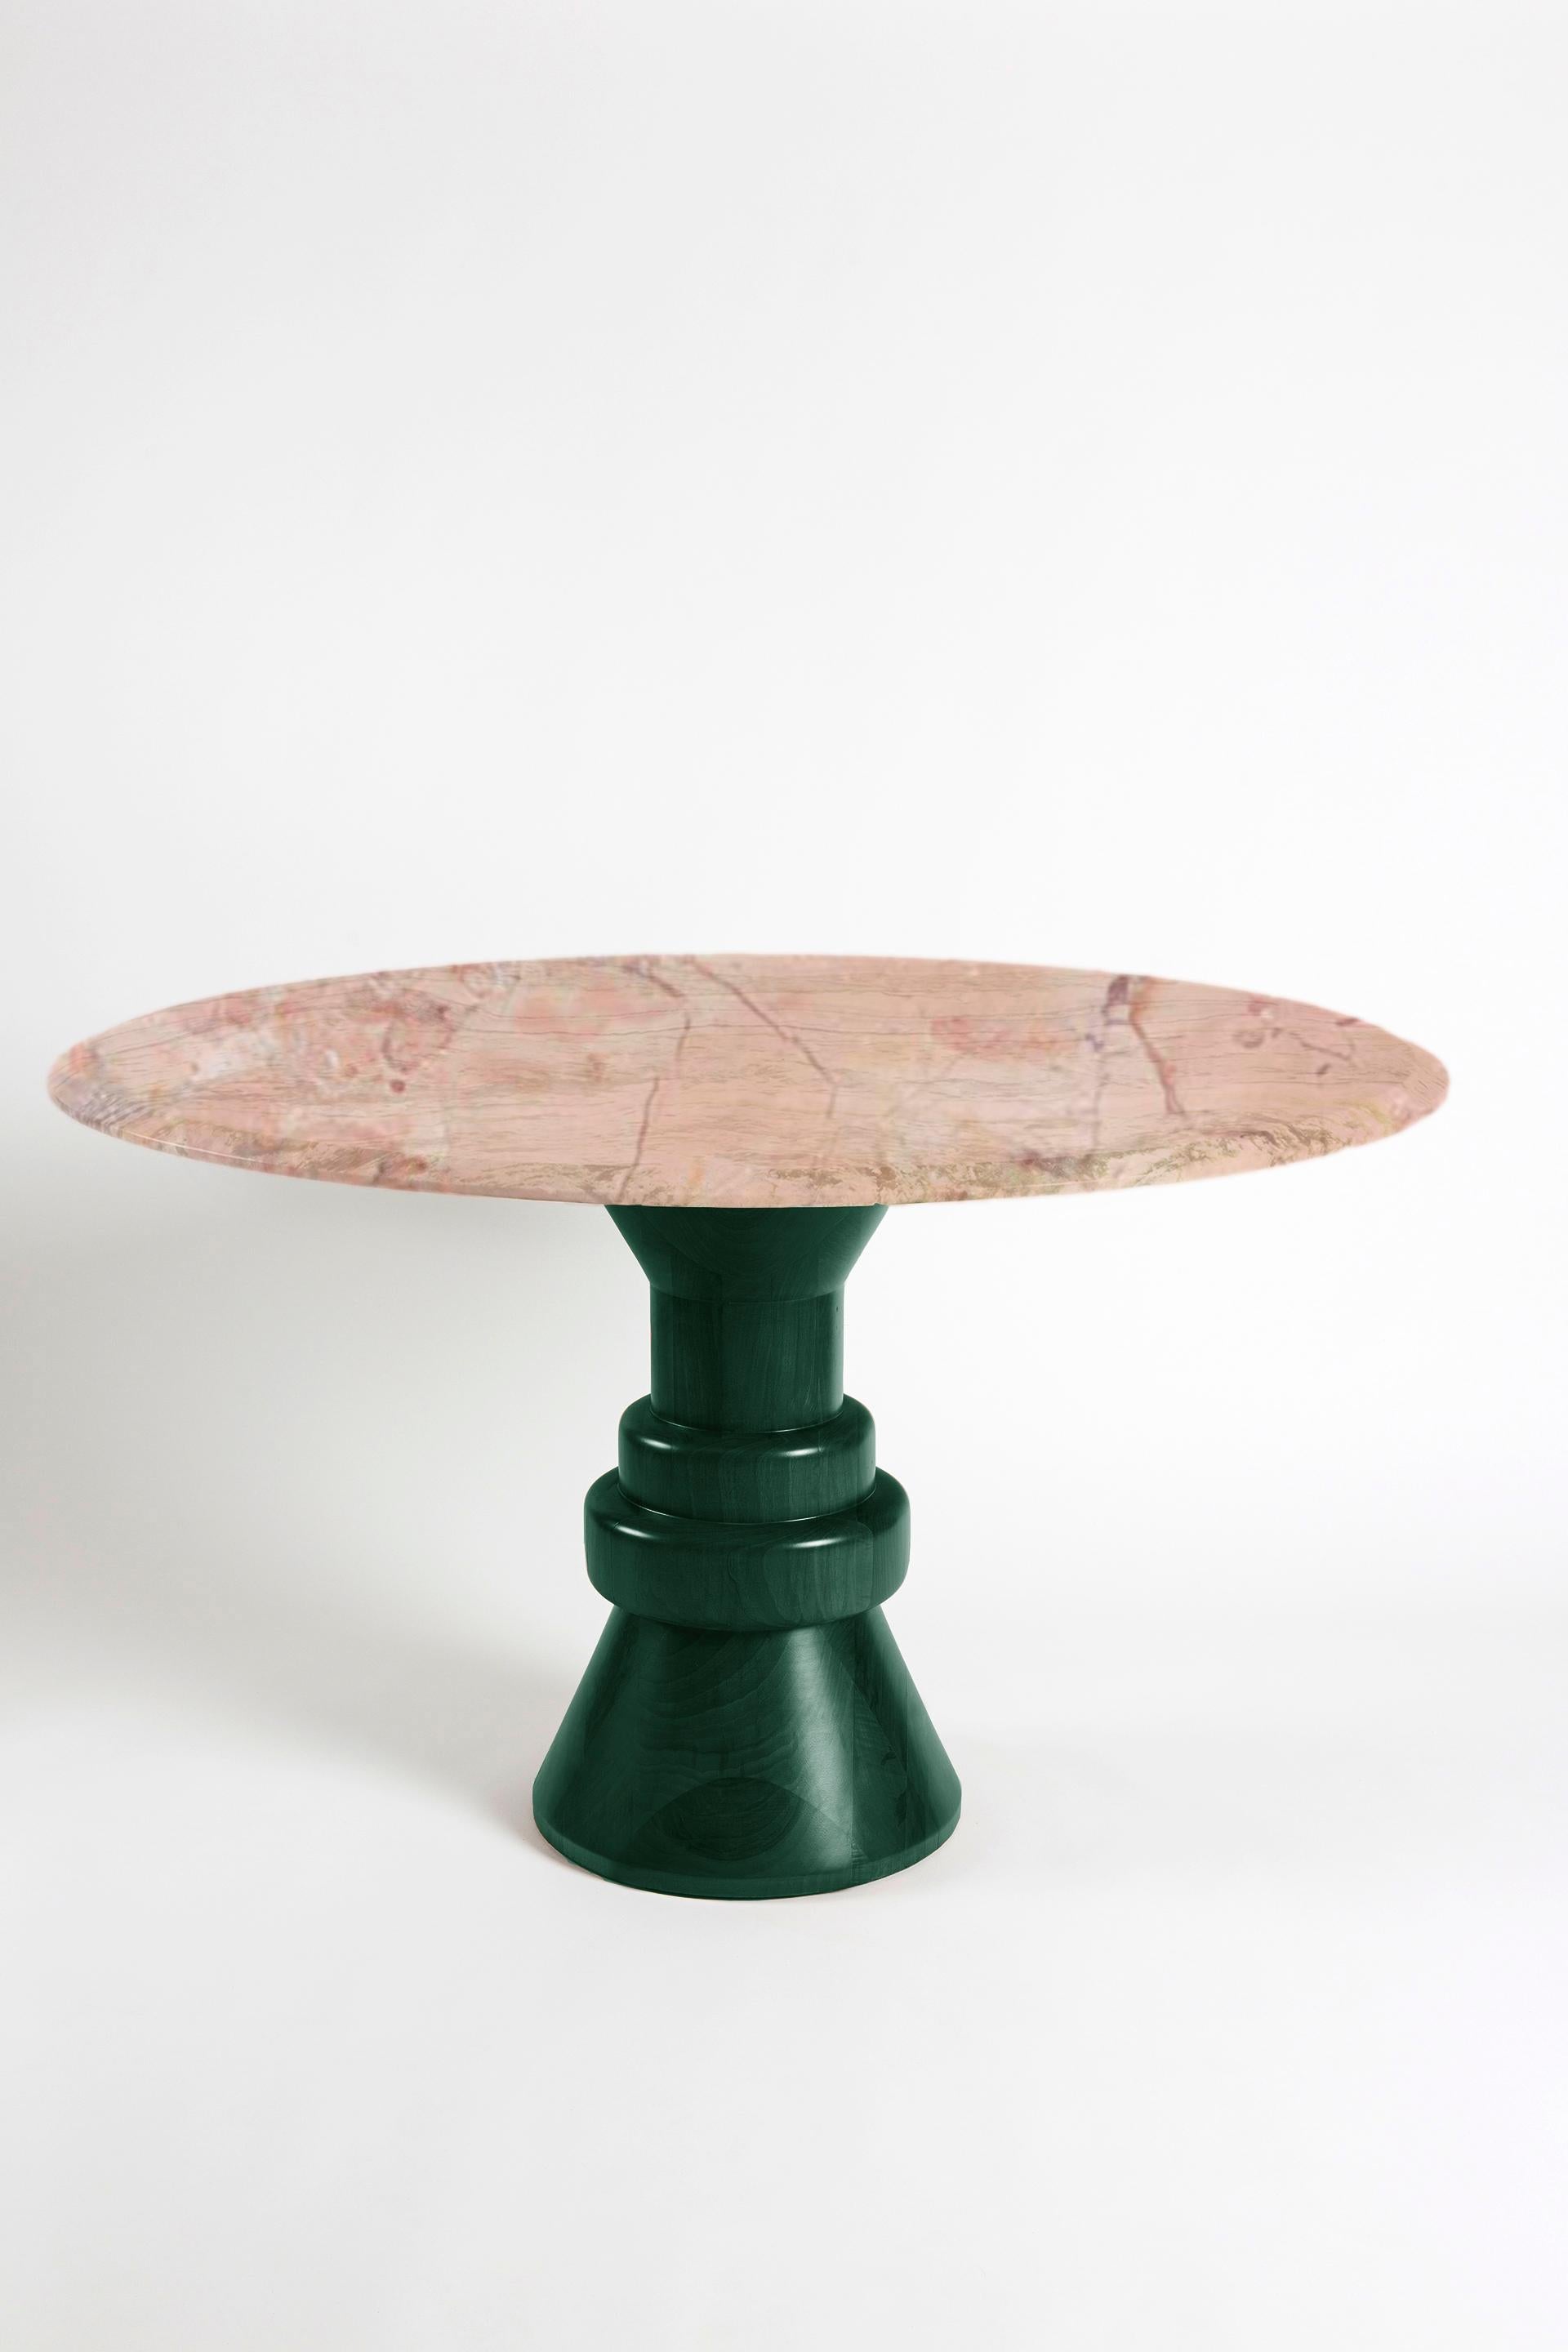 21st Century Cream Marble Round Dining Table with Sculptural Black Wooden Base For Sale 2